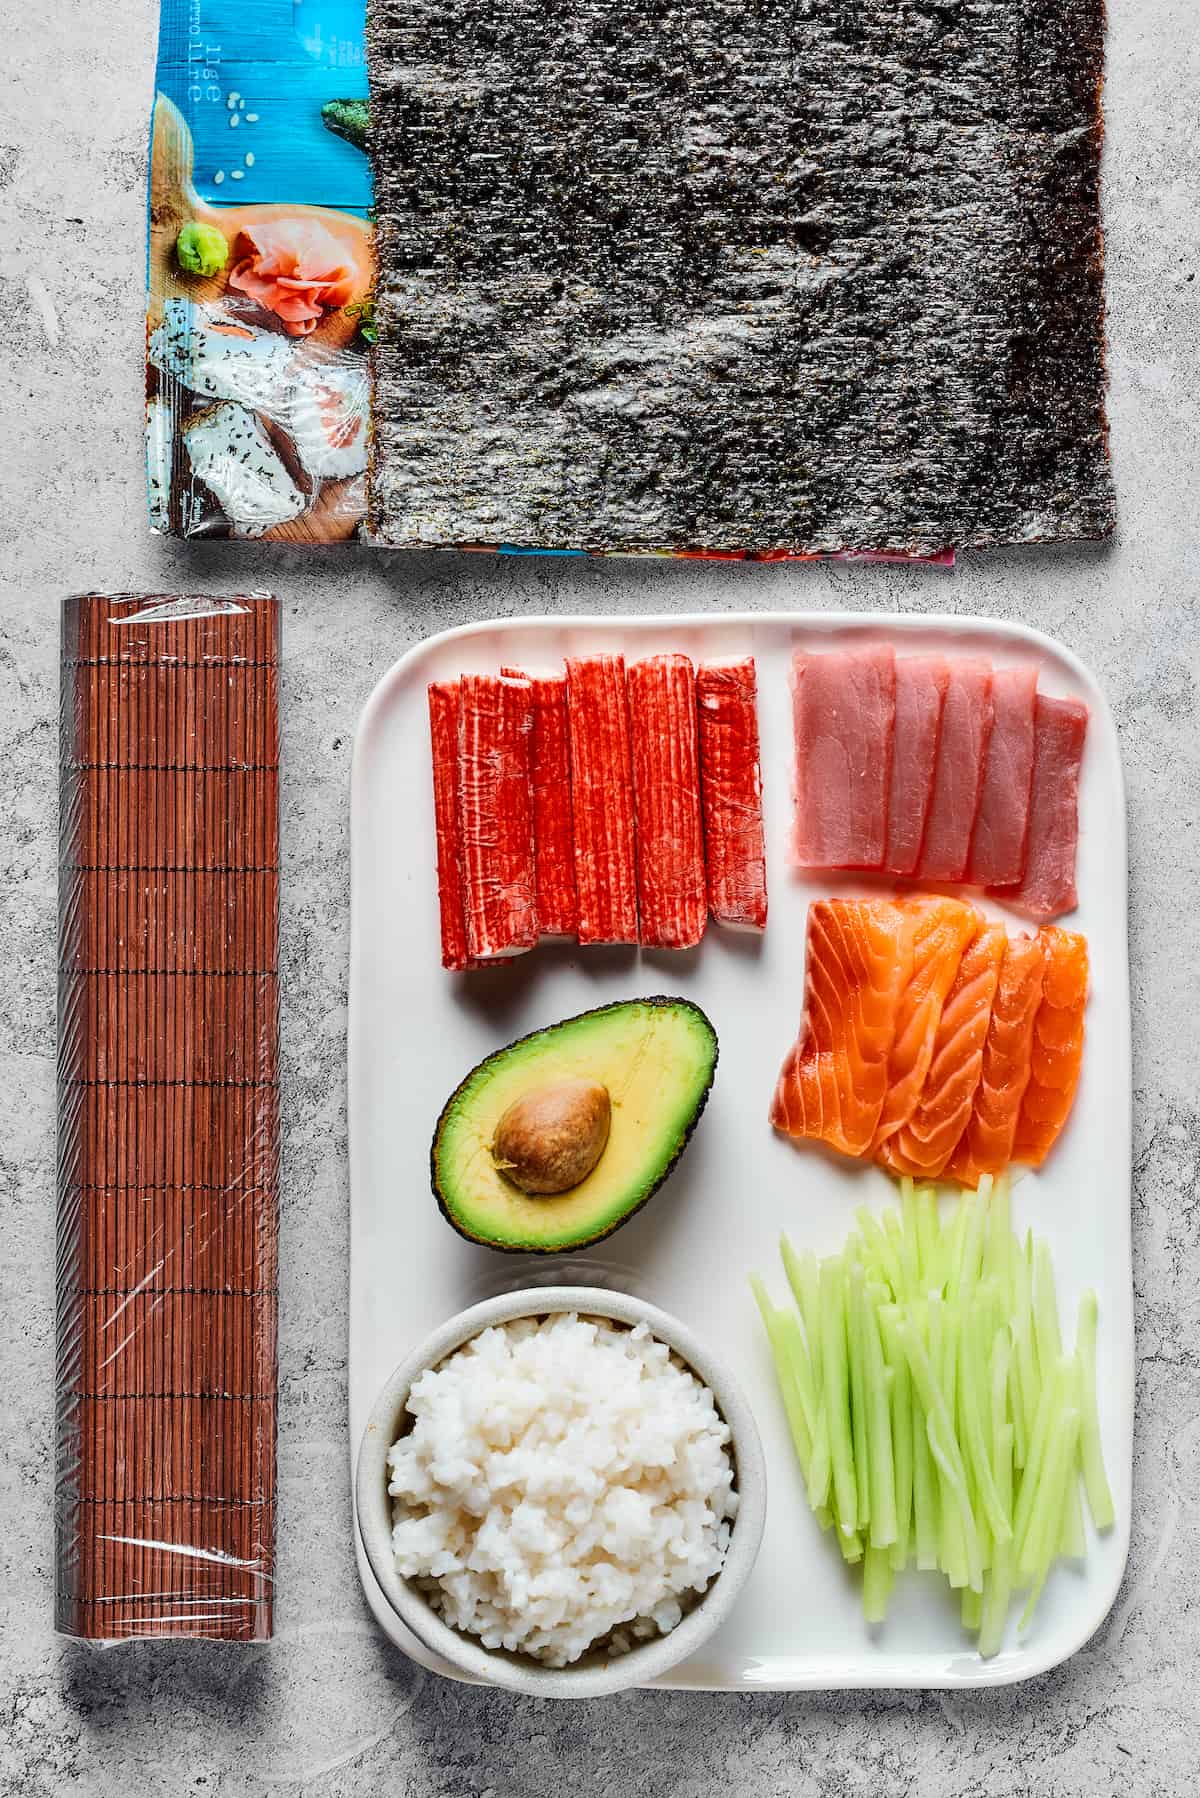 From top: Sheets of nori, a bamboo sushi mat, sticks of imitation crab, sliced raw tuna, an avocado, sliced raw salmon, prepared sushi rice, and sliced cucumber.